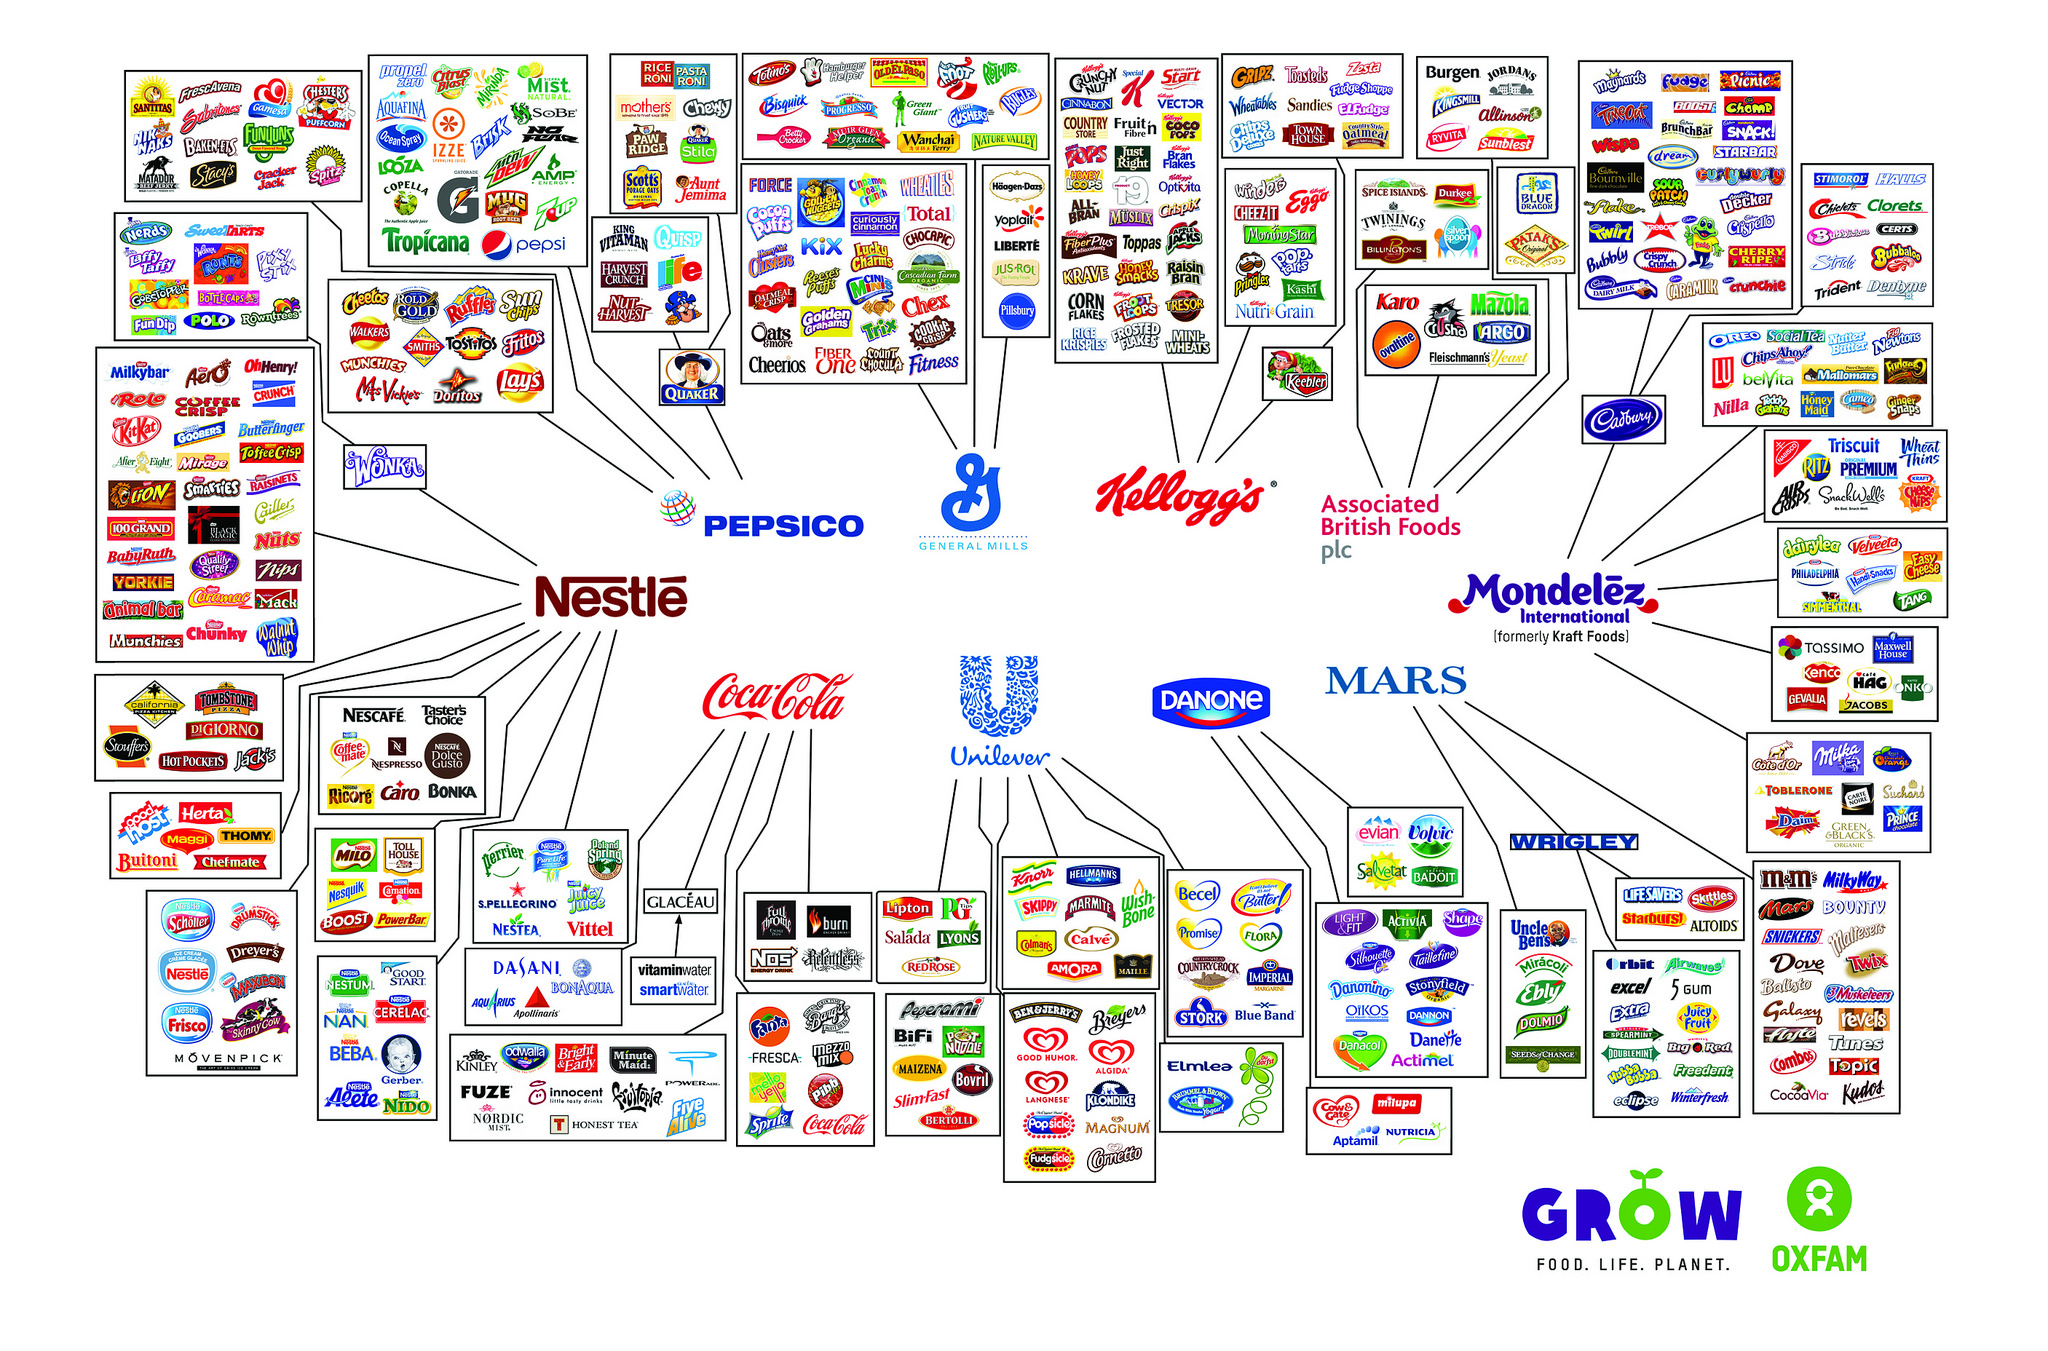 Ten major food and drink corporations and their subisidiaries, illustrates the illusion of choice